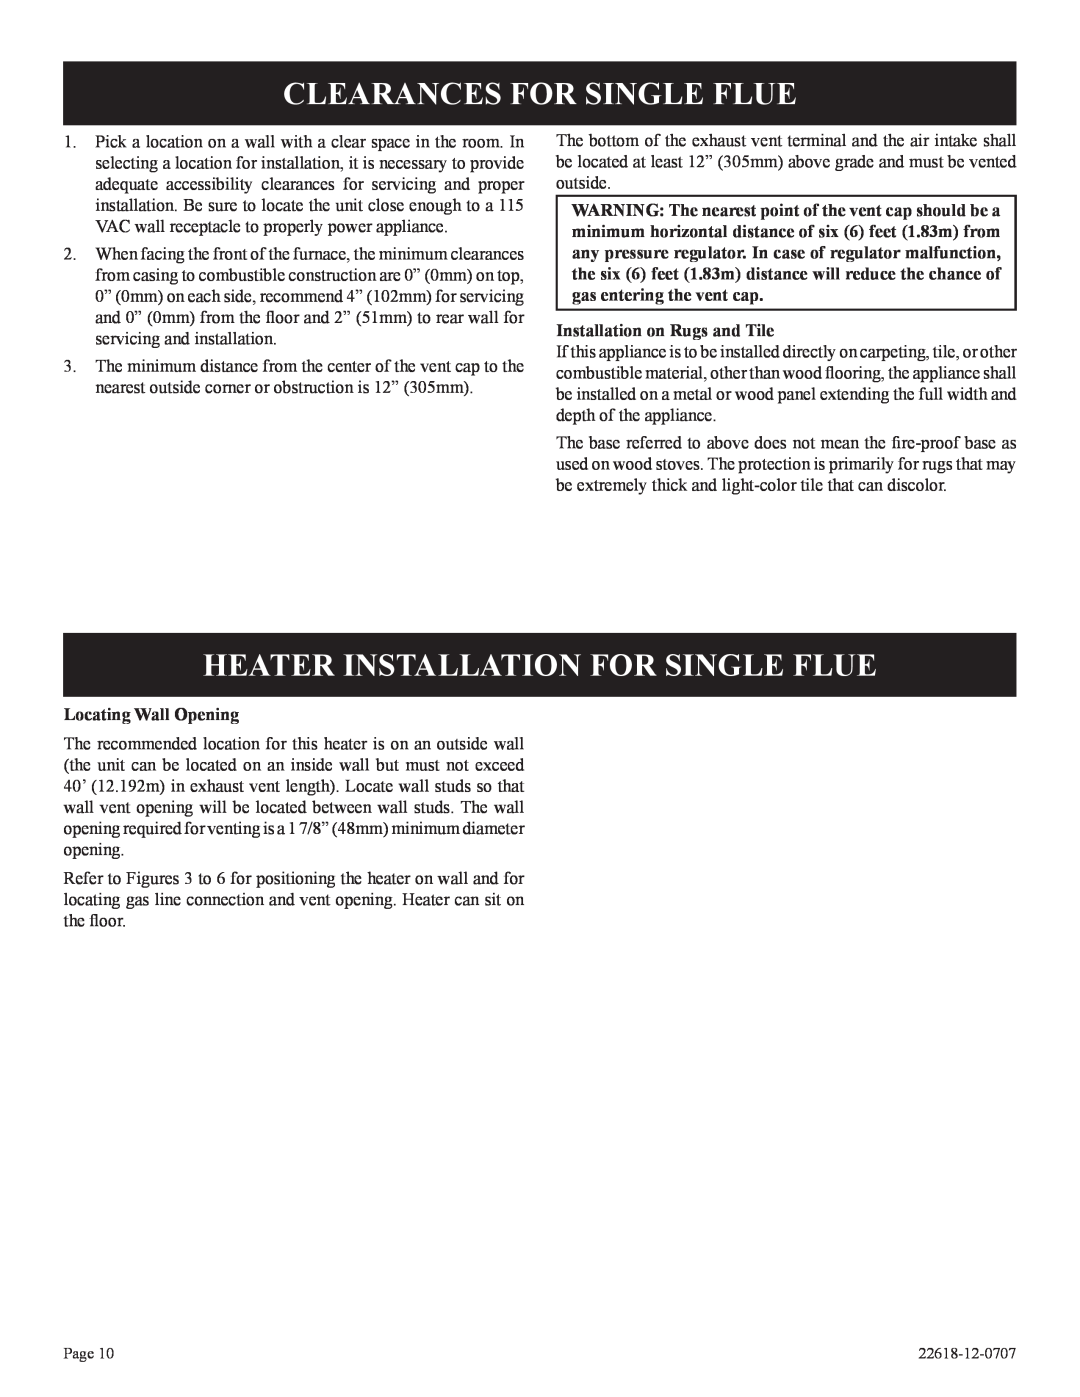 Elitegroup PV-28SV50-(BN,BP)-1 Clearances For Single Flue, Heater Installation For Single Flue, Locating Wall Opening 